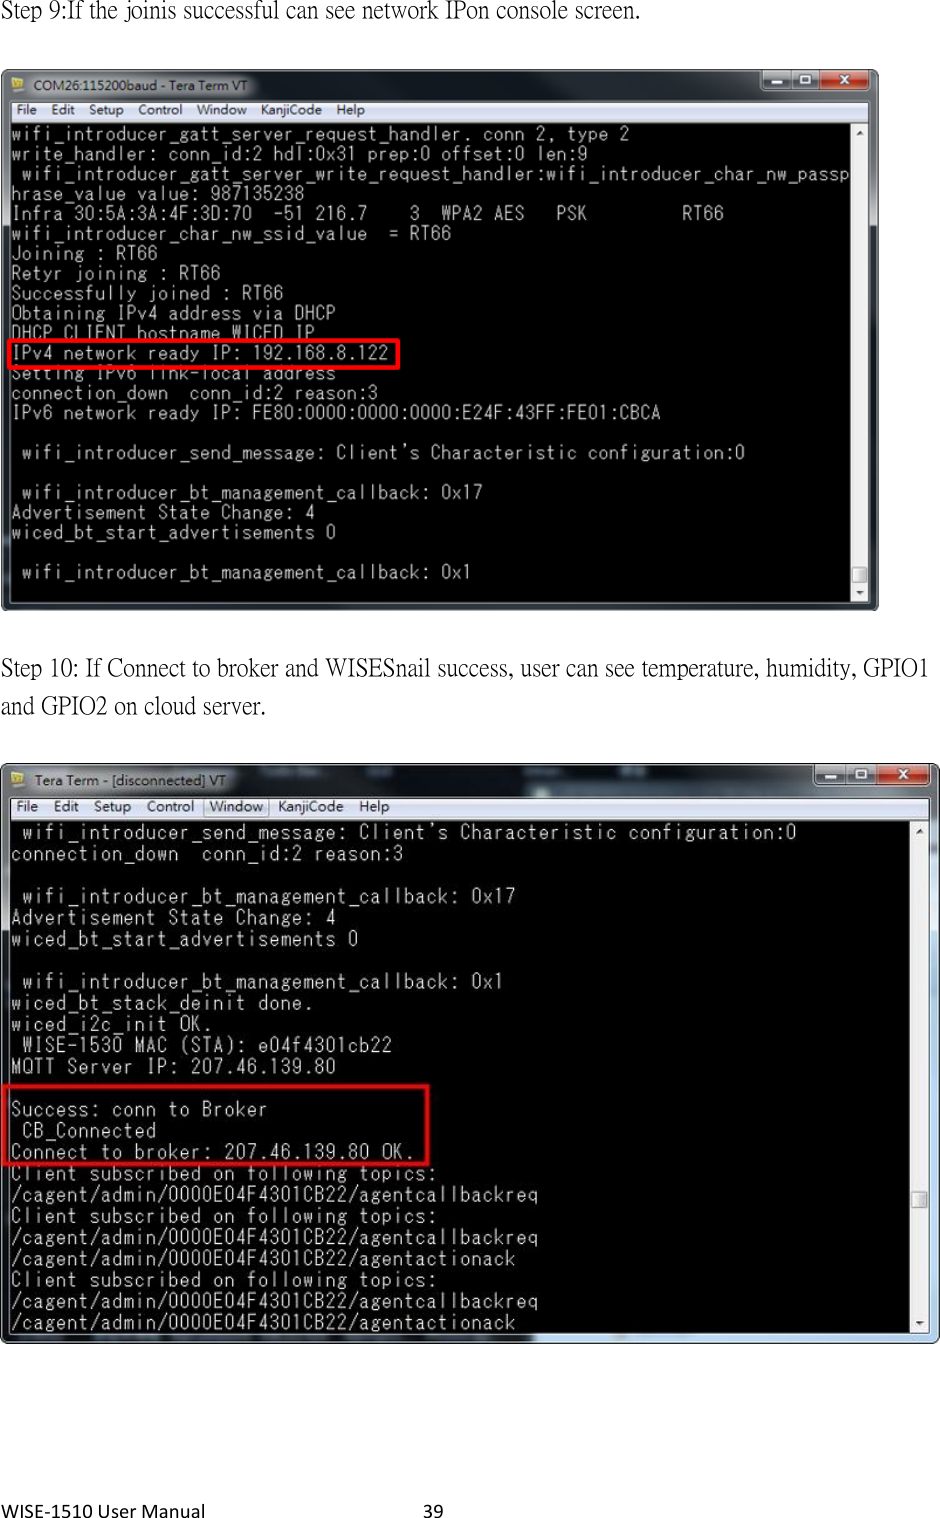 WISE-1510 User Manual  39 Step 9: If the join is successful can see network IP on console screen.    Step 10: If Connect to broker and WISESnail success, user can see temperature, humidity, GPIO1 and GPIO2 on cloud server.    